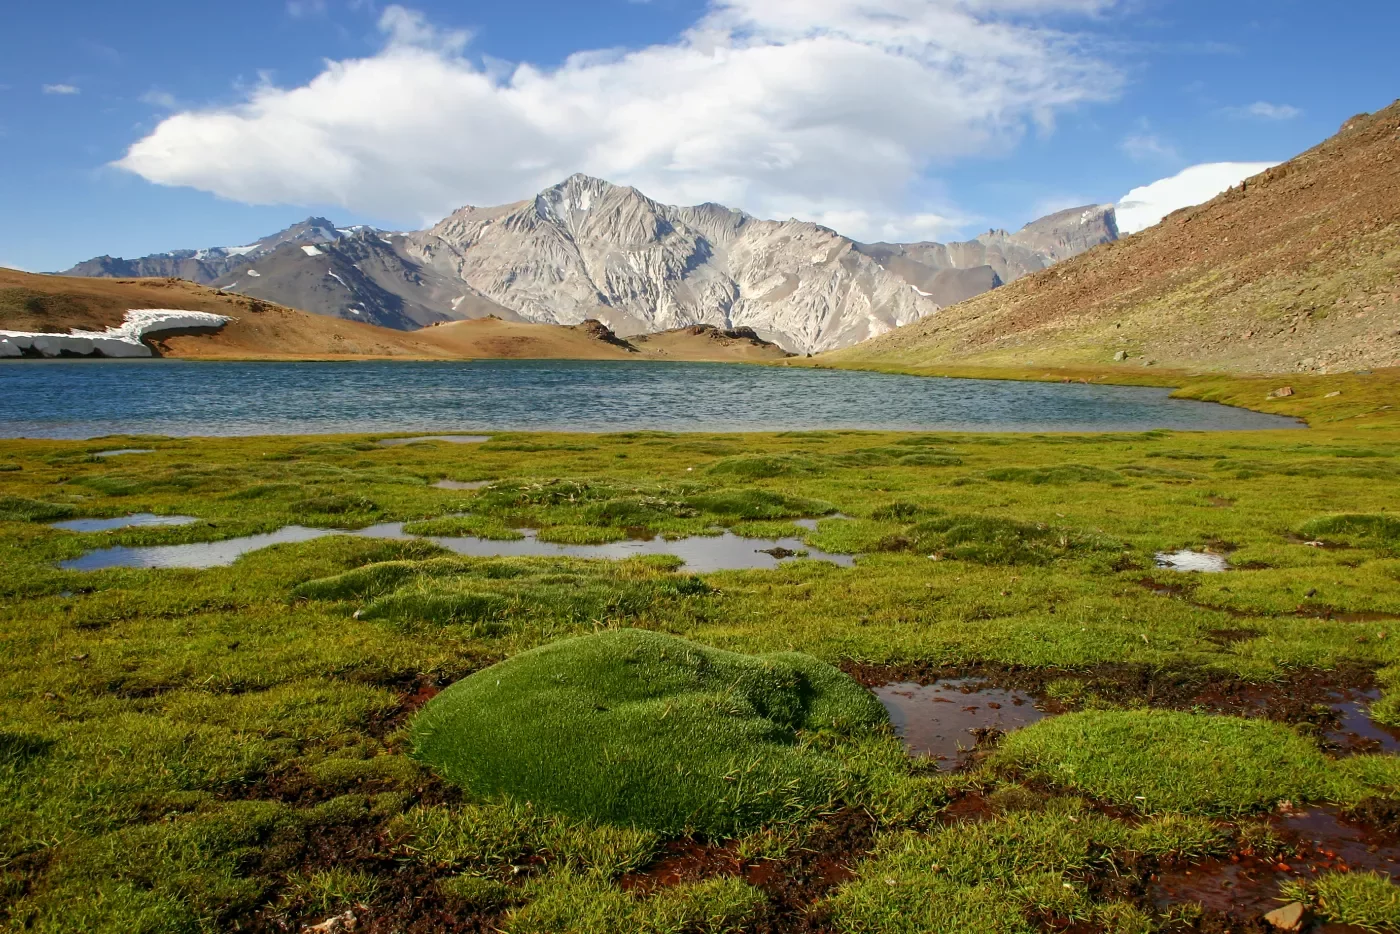 Wide shot of small lake, arid, snowy mountains in background.